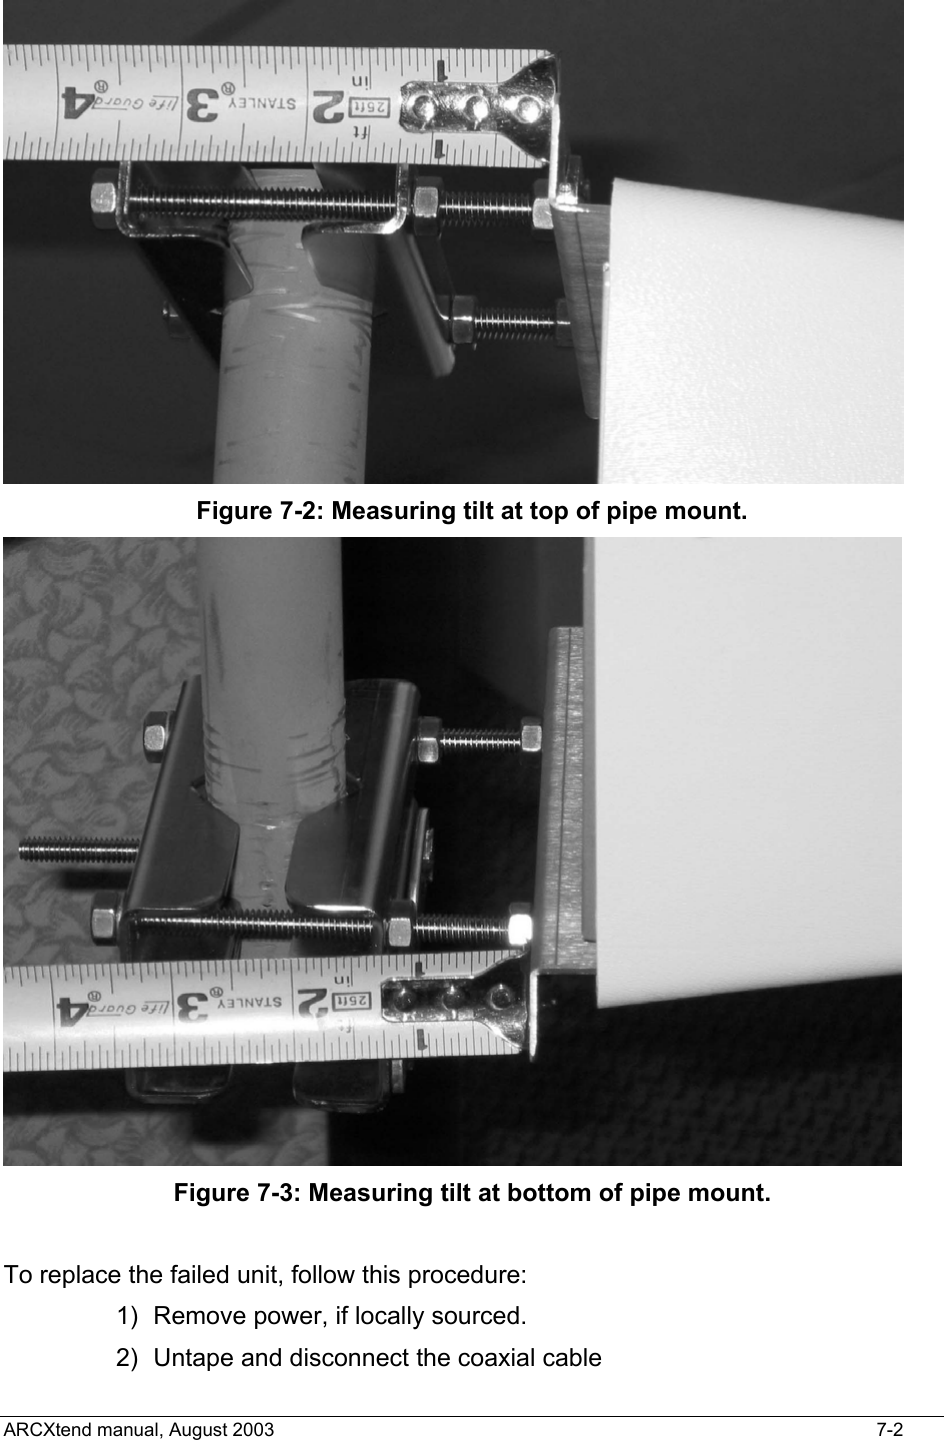   Figure 7-2: Measuring tilt at top of pipe mount.  Figure 7-3: Measuring tilt at bottom of pipe mount.  To replace the failed unit, follow this procedure: 1)  Remove power, if locally sourced. 2)  Untape and disconnect the coaxial cable ARCXtend manual, August 2003    7-2 